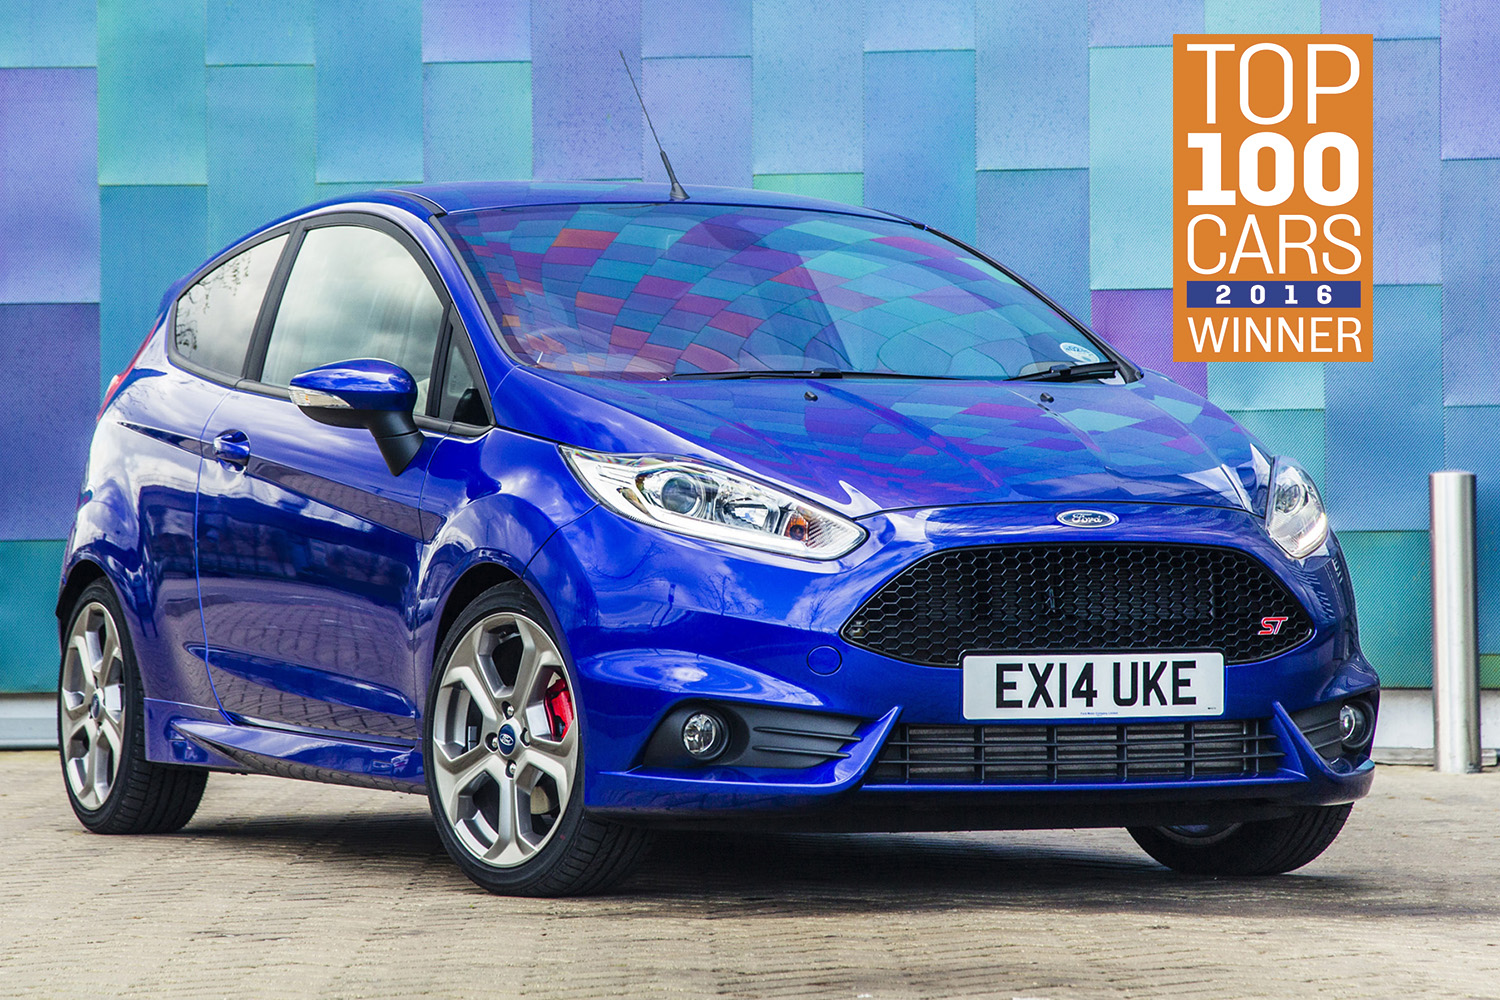 Ford Fiesta ST: The Sunday Times Top 100 Cars 2016: Top 5 Warm Hatches